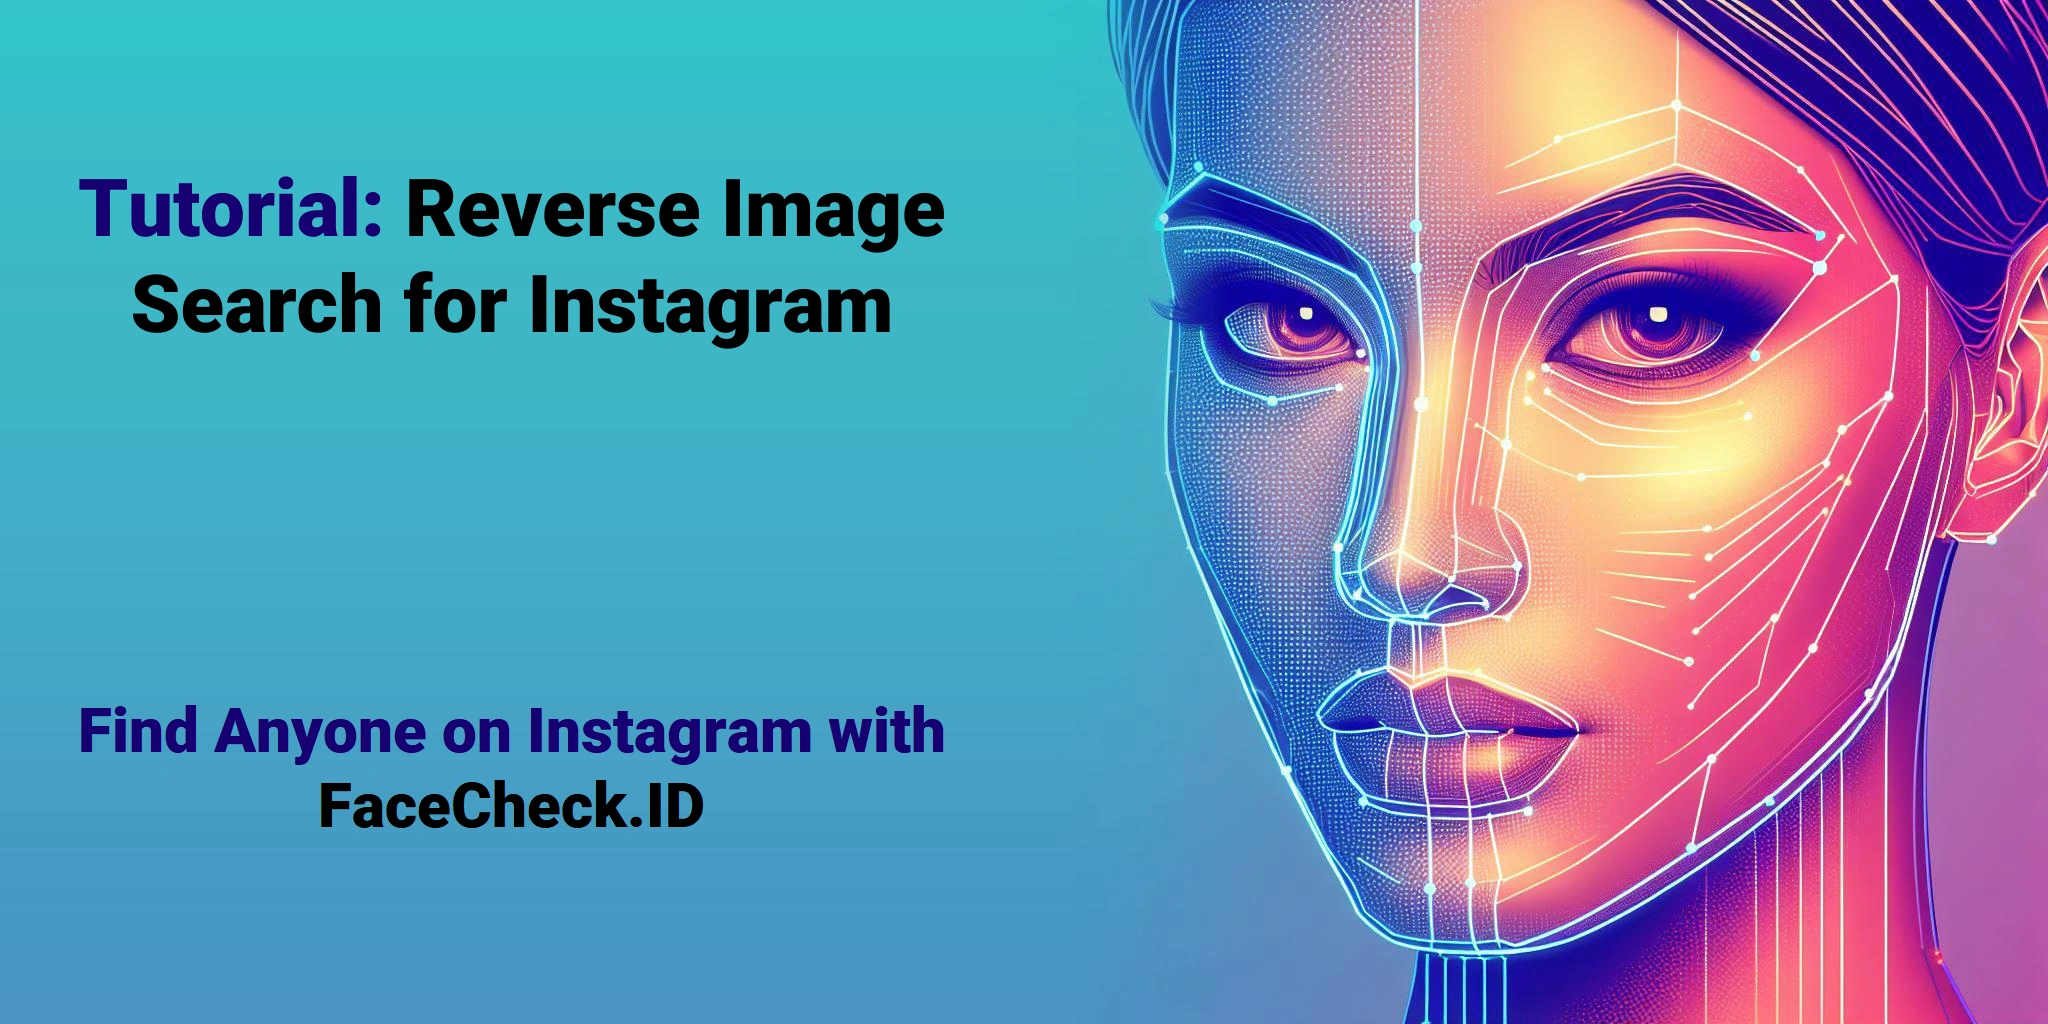 Tutorial: Reverse Image Search for Instagram Find Anyone on Instagram with FaceCheck.ID